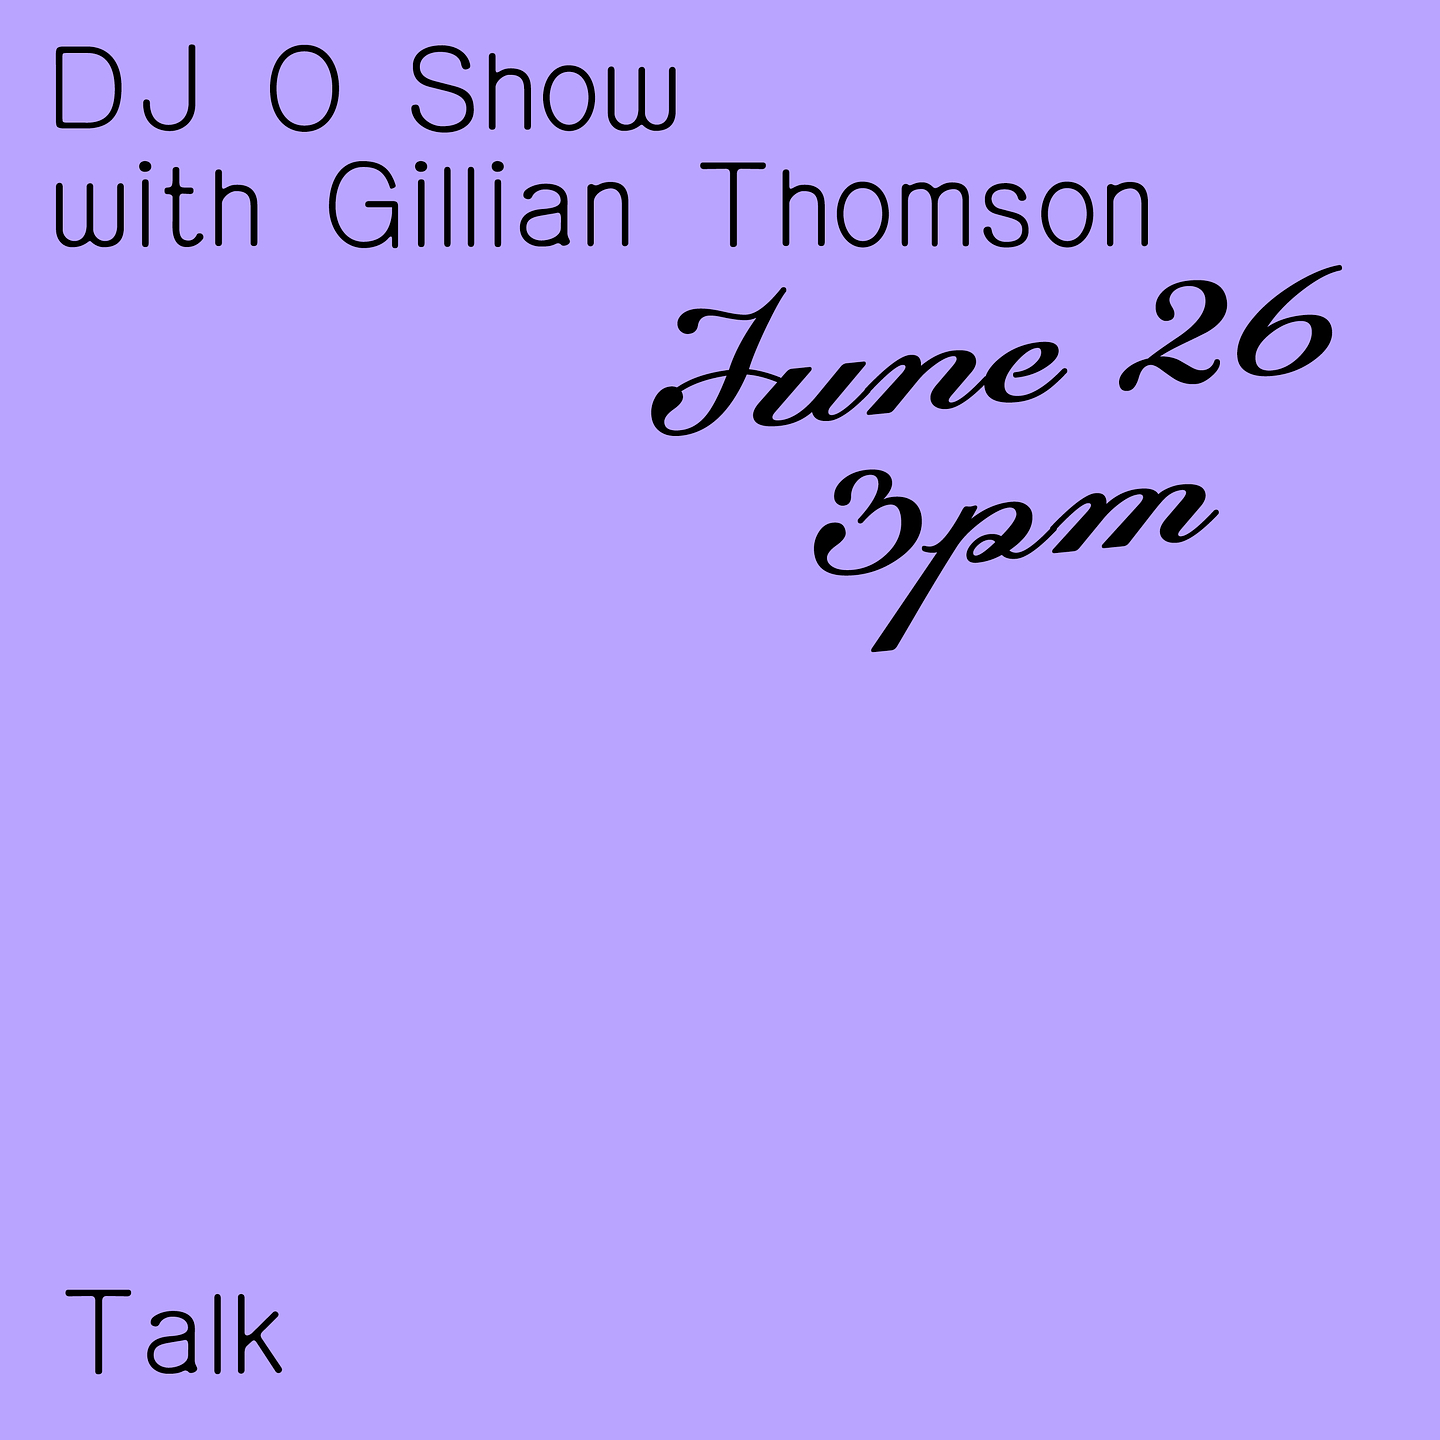 A graphic that reads "DJ O Show with Gillian Thomson. June 26 3 pm. Talk" in a black script font on a lilac background.